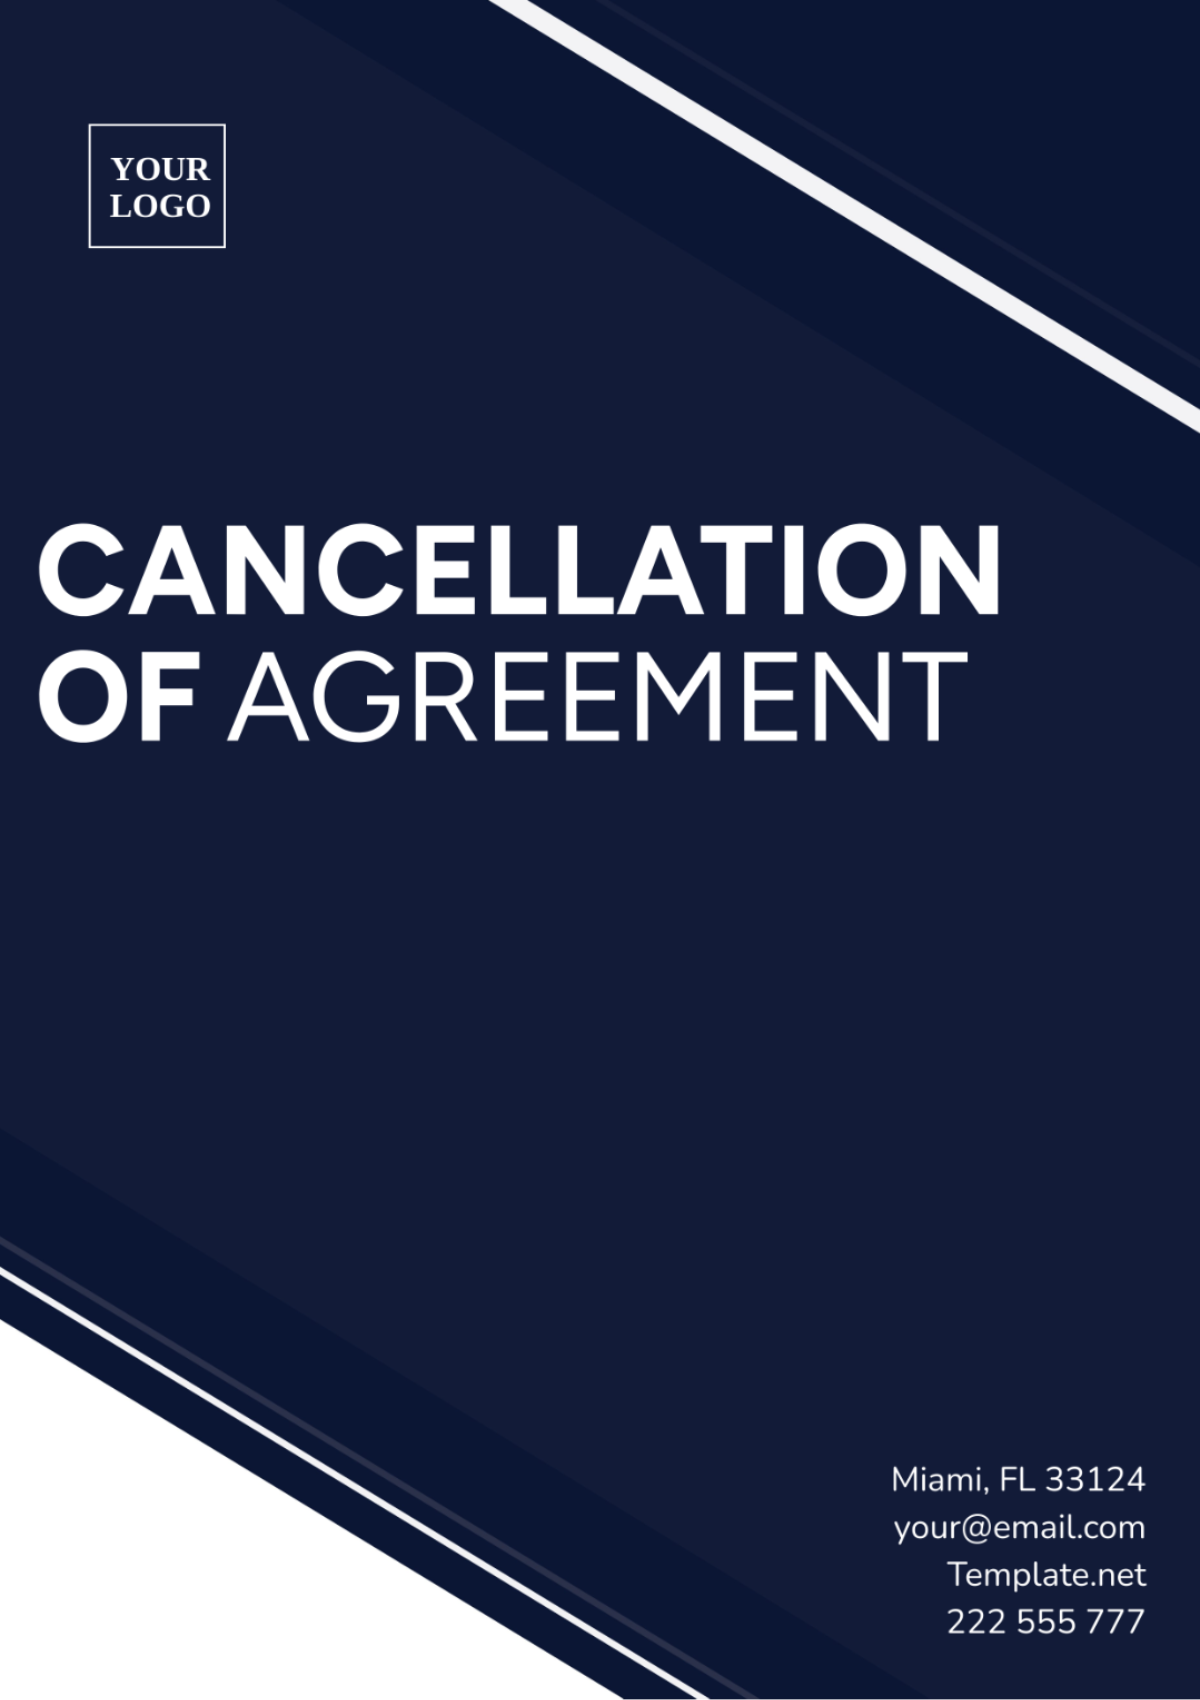 Cancellation of Agreement Template